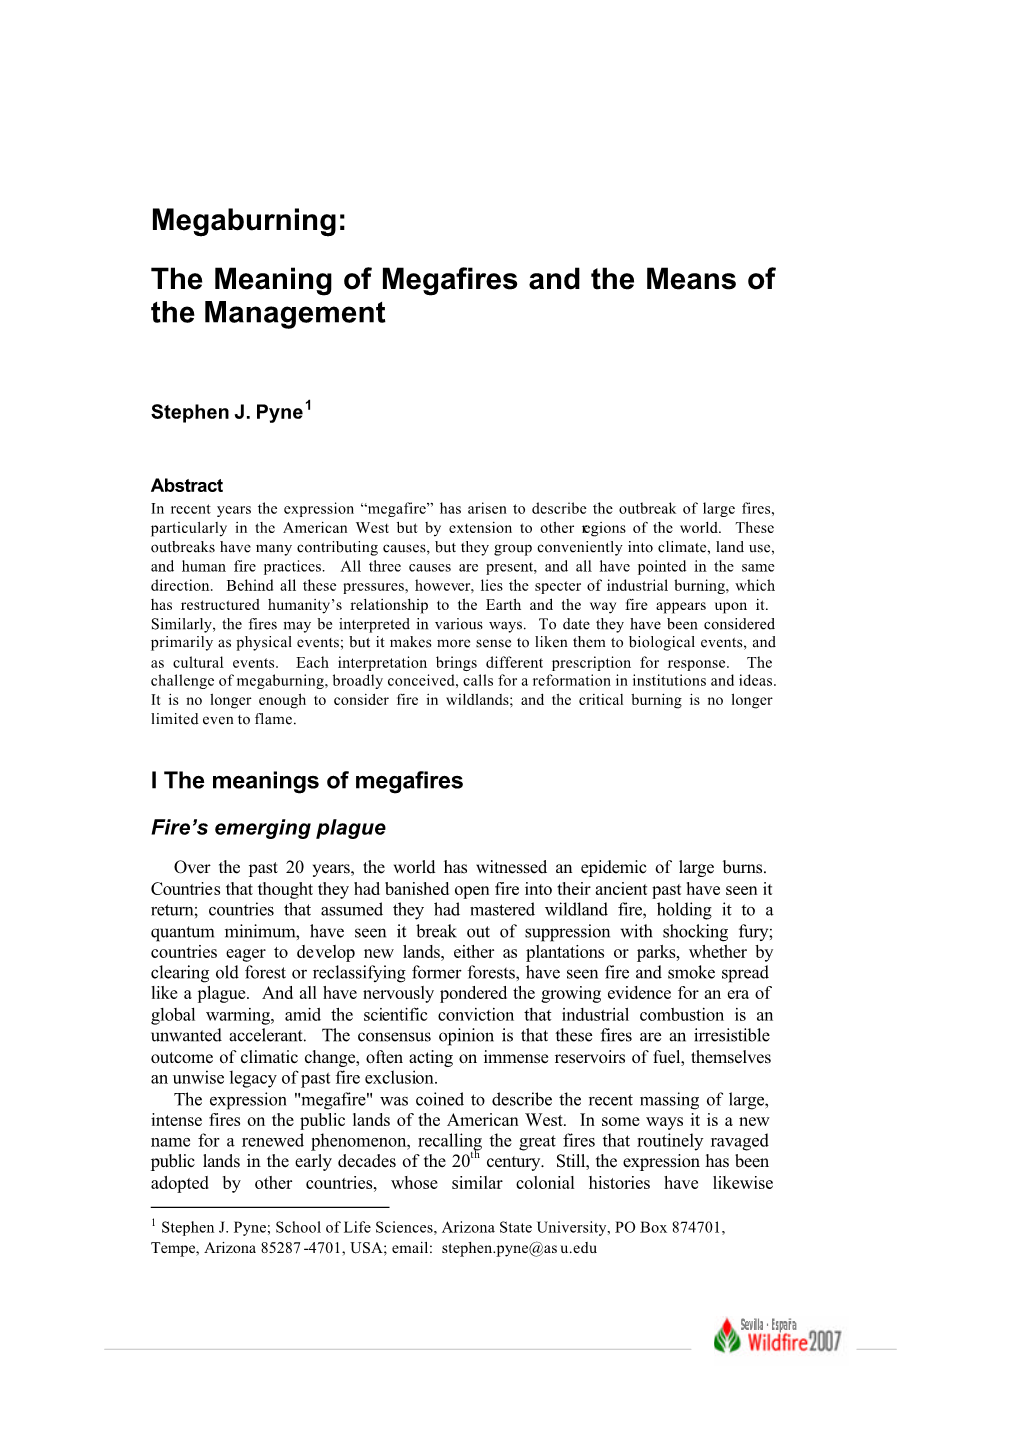 The Meaning of Megafires and the Means of the Management